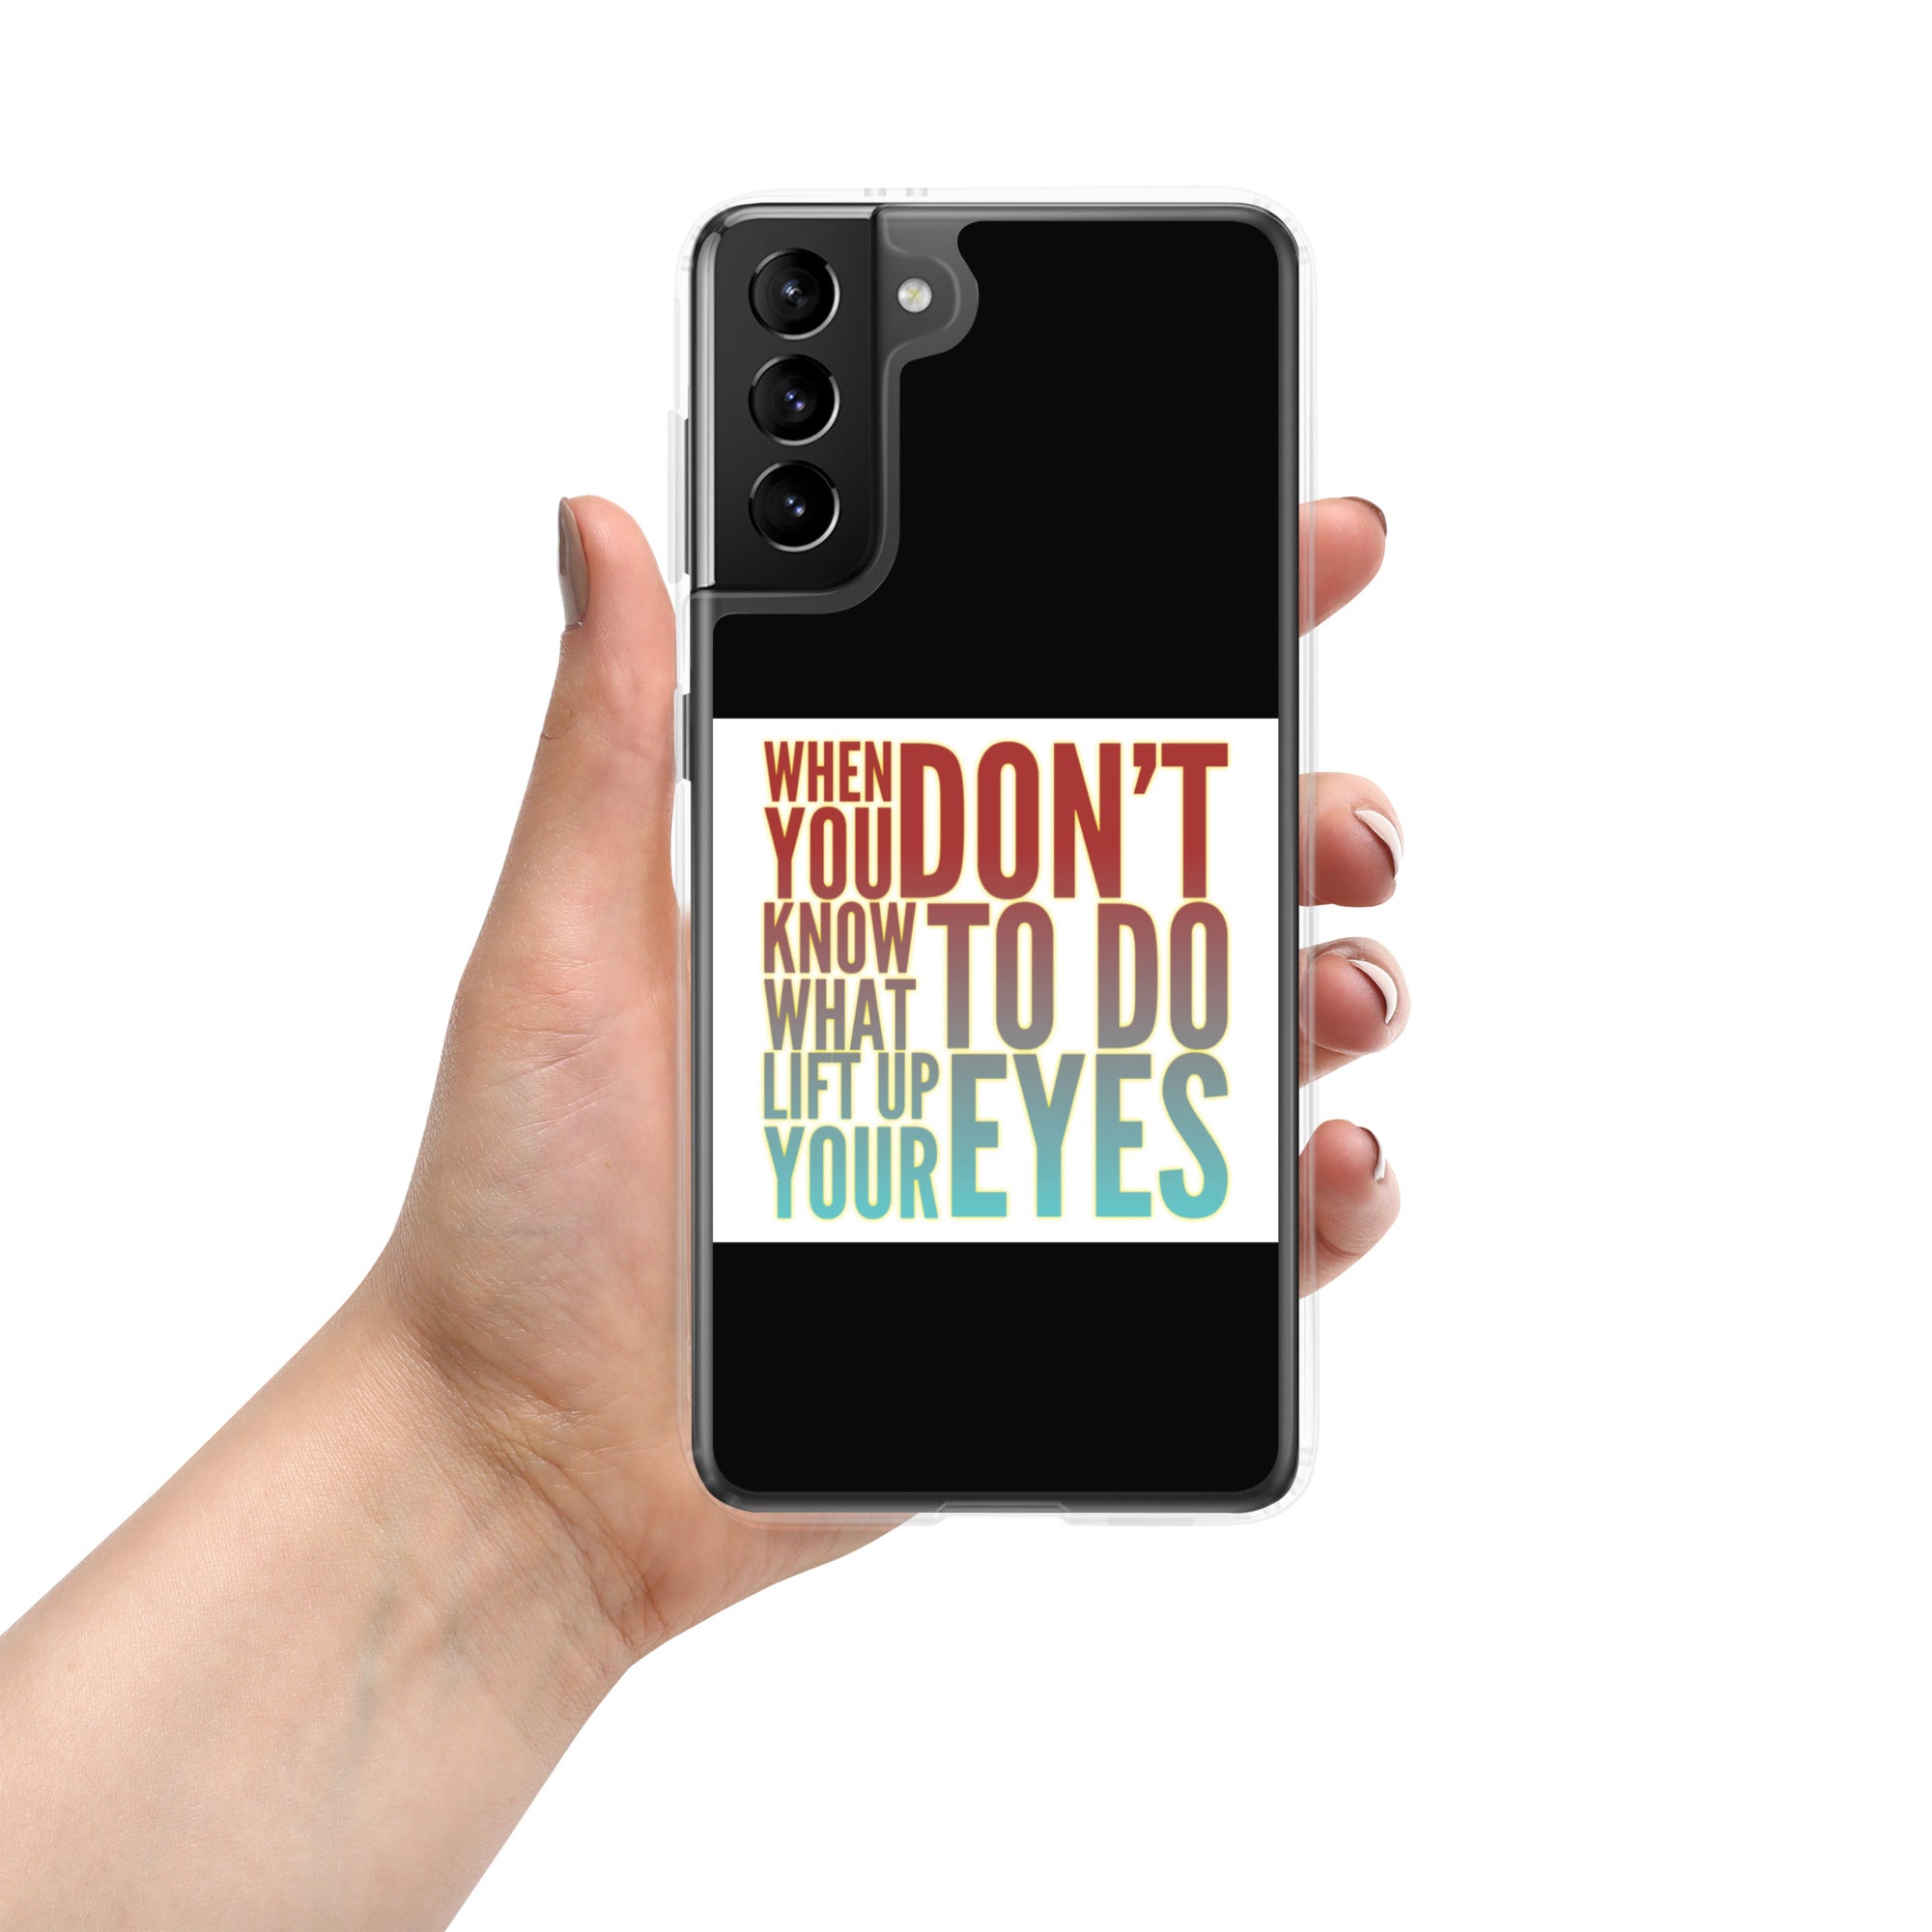 GloWell Designs - Samsung Case - Motivational Quote - Lift Up Your Eyes - GloWell Designs